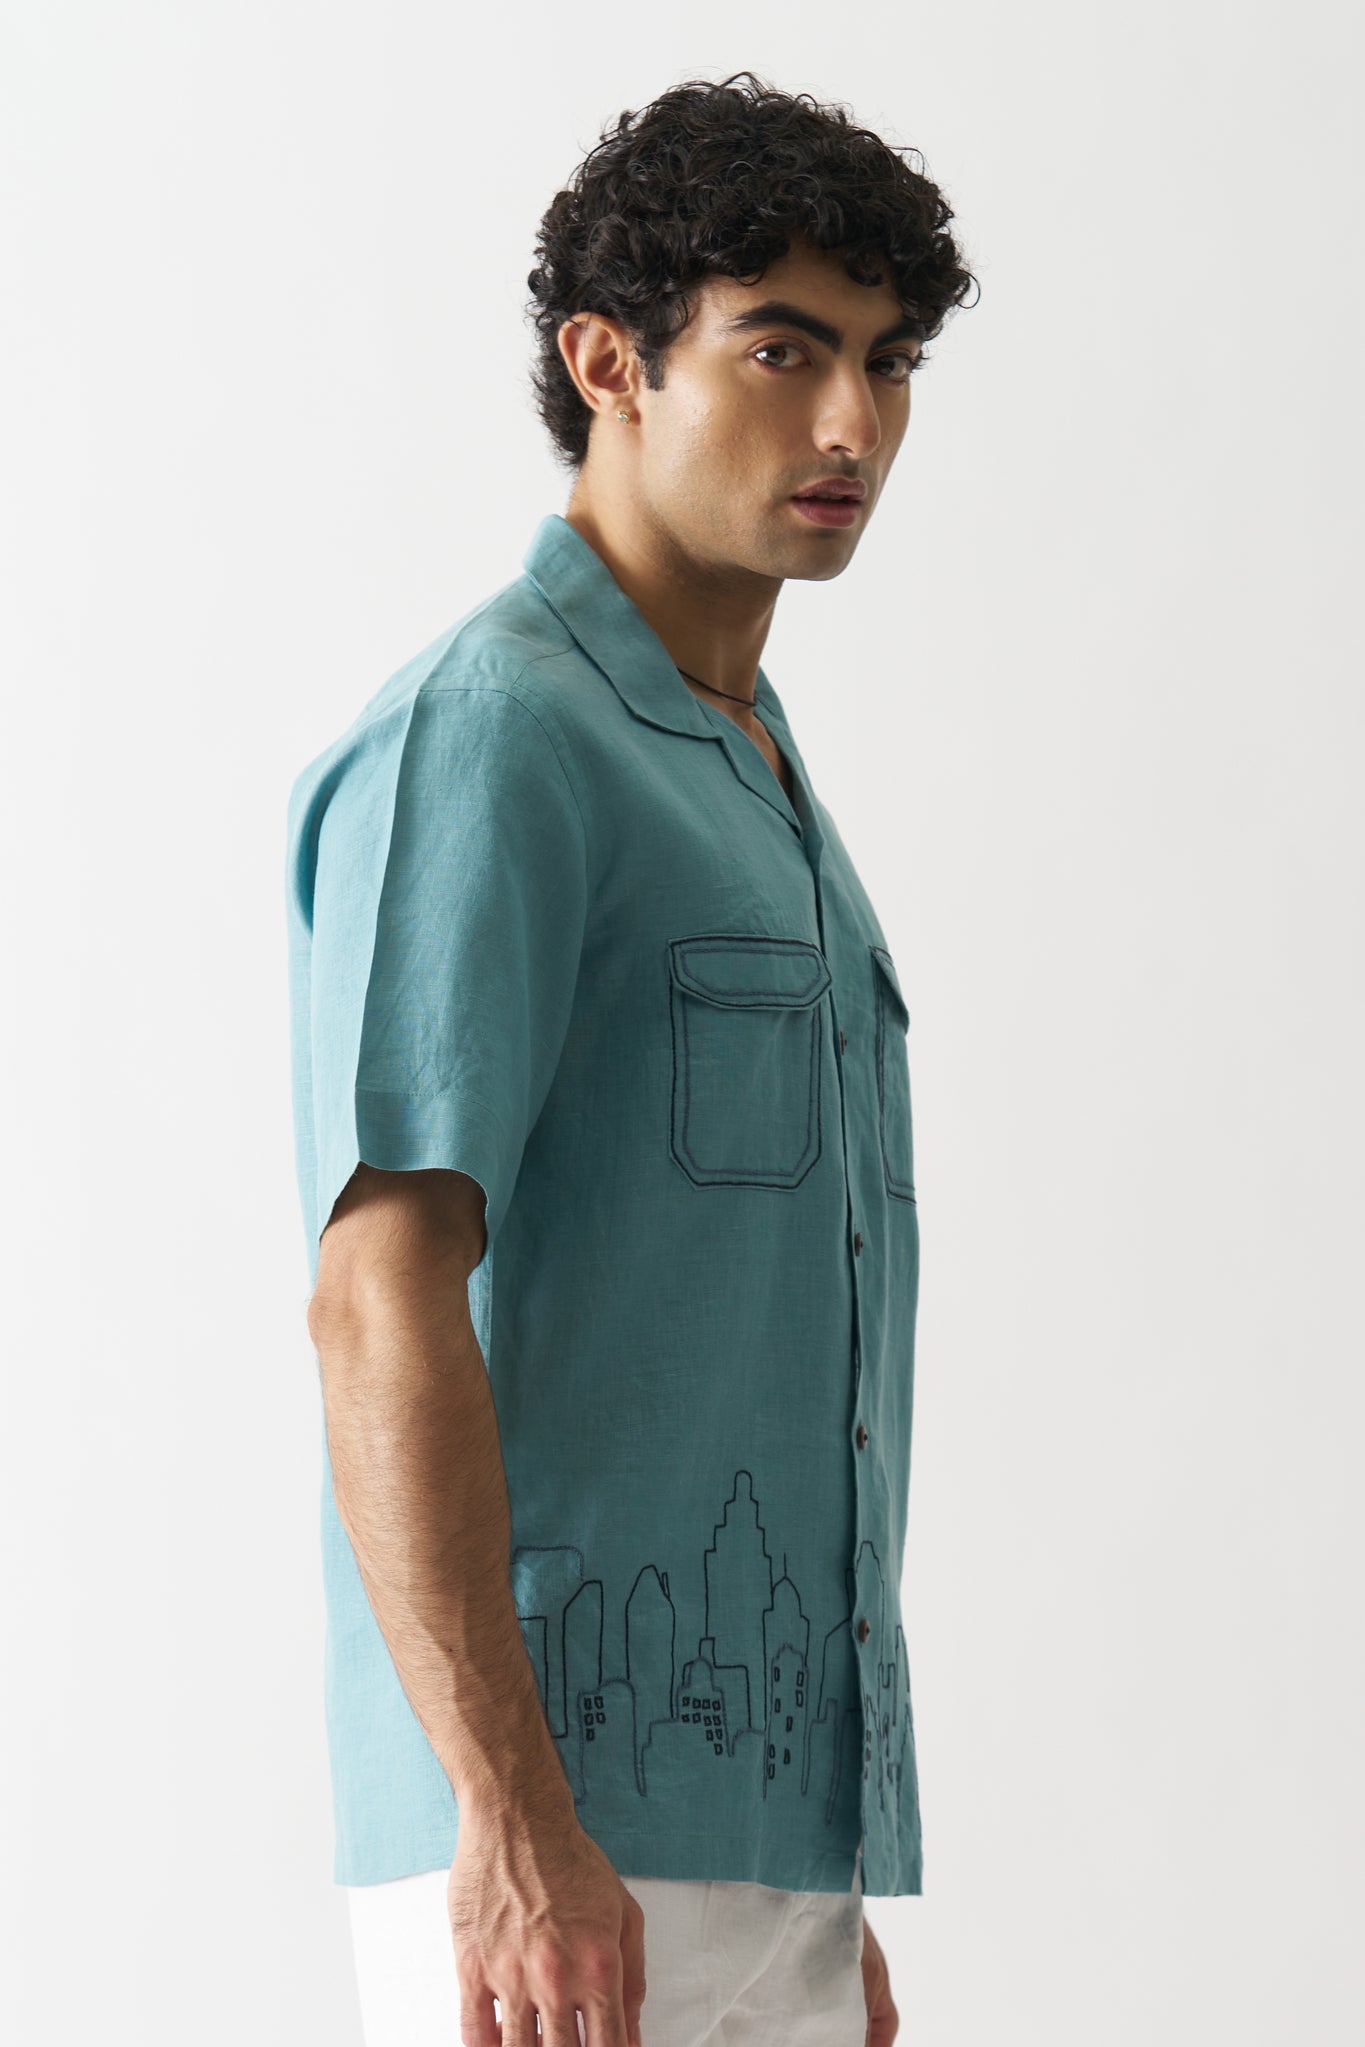 Downtown Dreams - Hand Embroidered Unisex Pure Linen Shirt - CiceroniShirtsCultura Studio